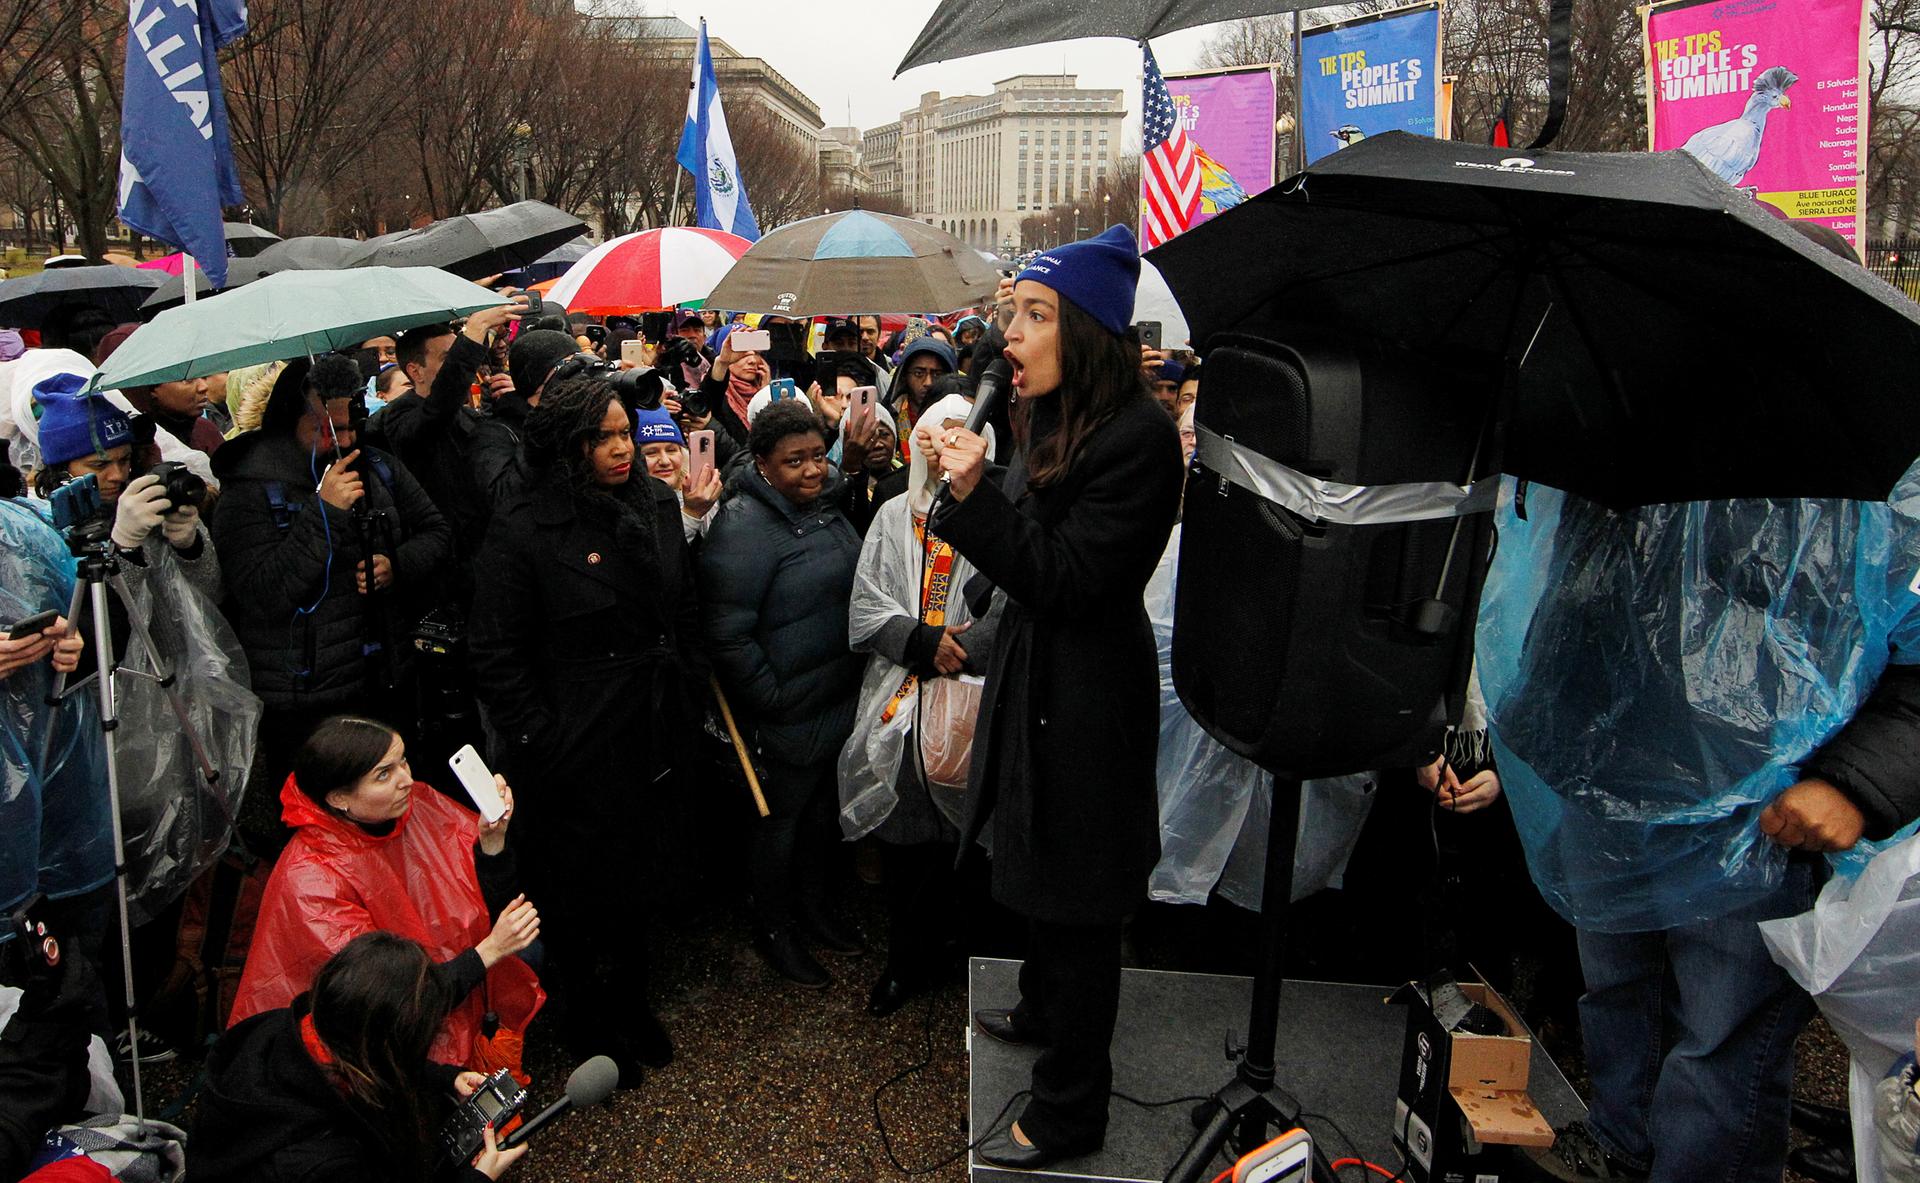 A woman with a microphone addresses the crowd surrounding her in the rain.